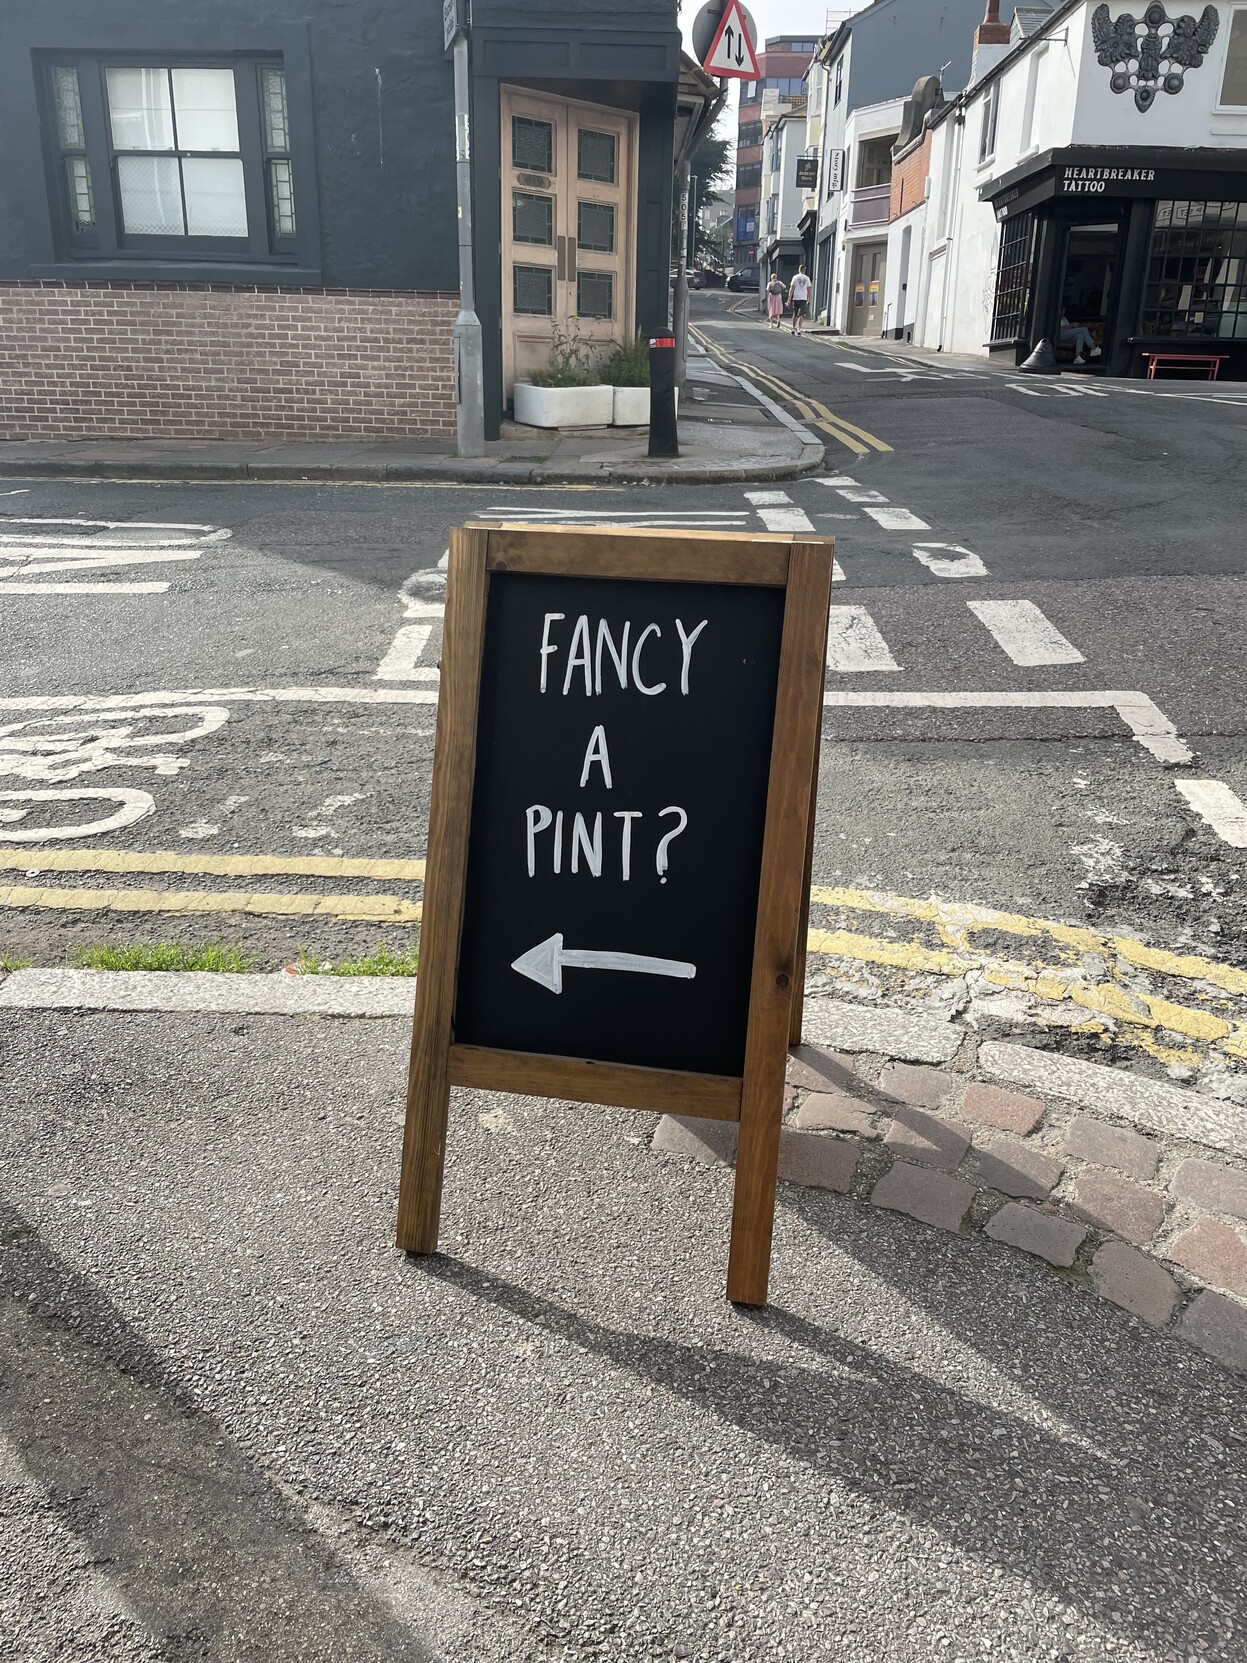 On a street corner, a sign saying “fancy a pint?” with an arrow pointing to the street on the left.